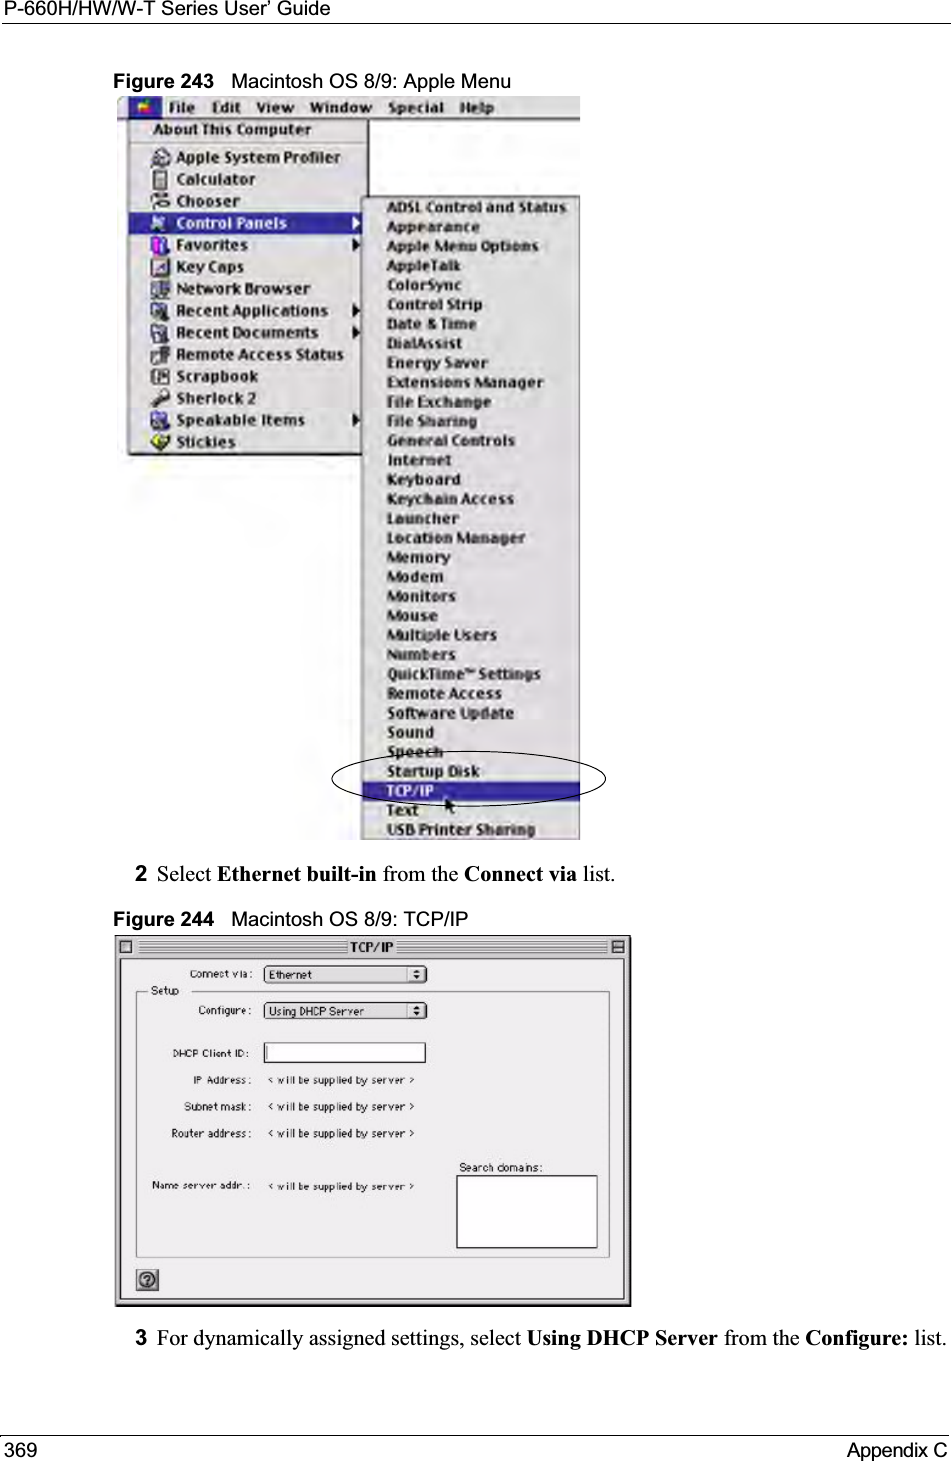 P-660H/HW/W-T Series User’ Guide369 Appendix CFigure 243   Macintosh OS 8/9: Apple Menu2Select Ethernet built-in from the Connect via list.Figure 244   Macintosh OS 8/9: TCP/IP3For dynamically assigned settings, select Using DHCP Server from the Configure: list.